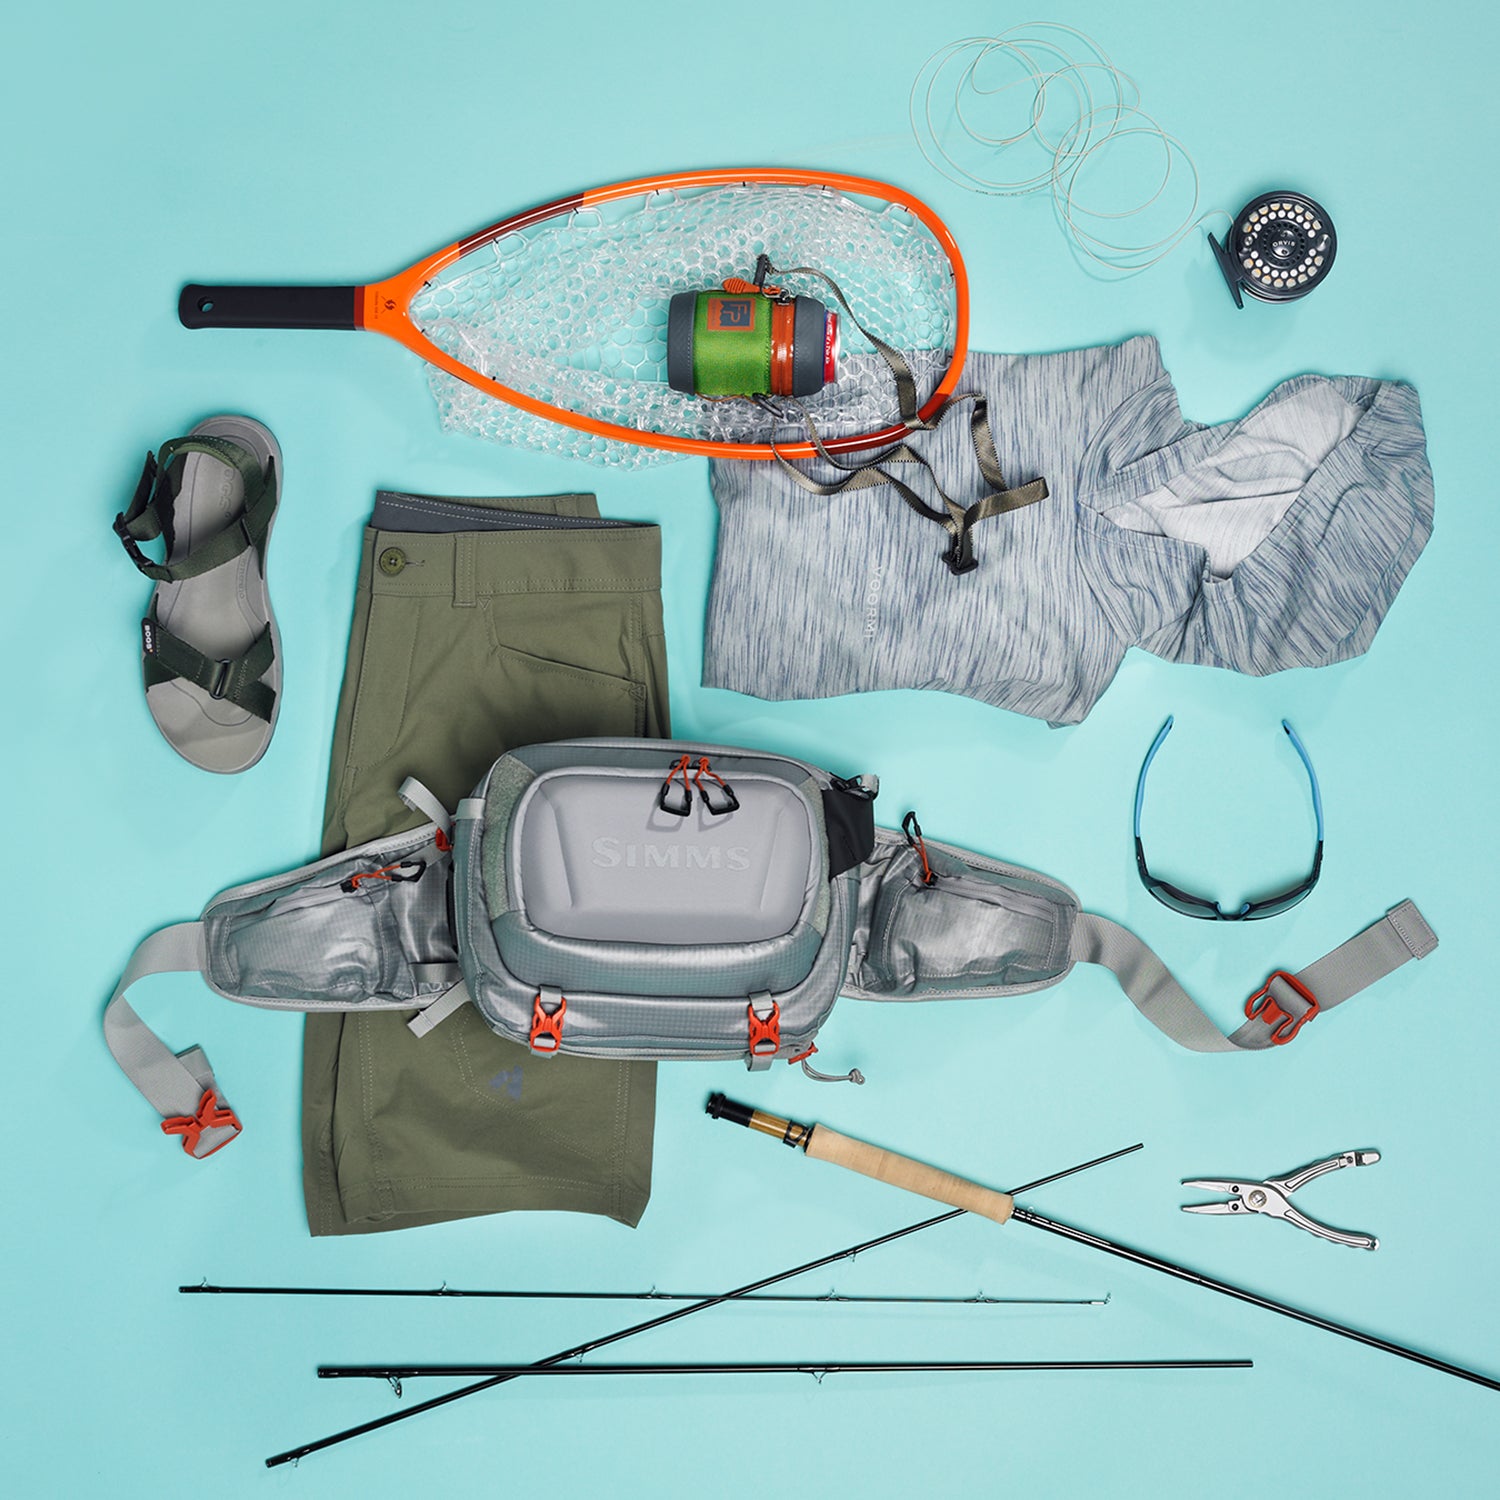 The Best Fly-Fishing Tools of 2017